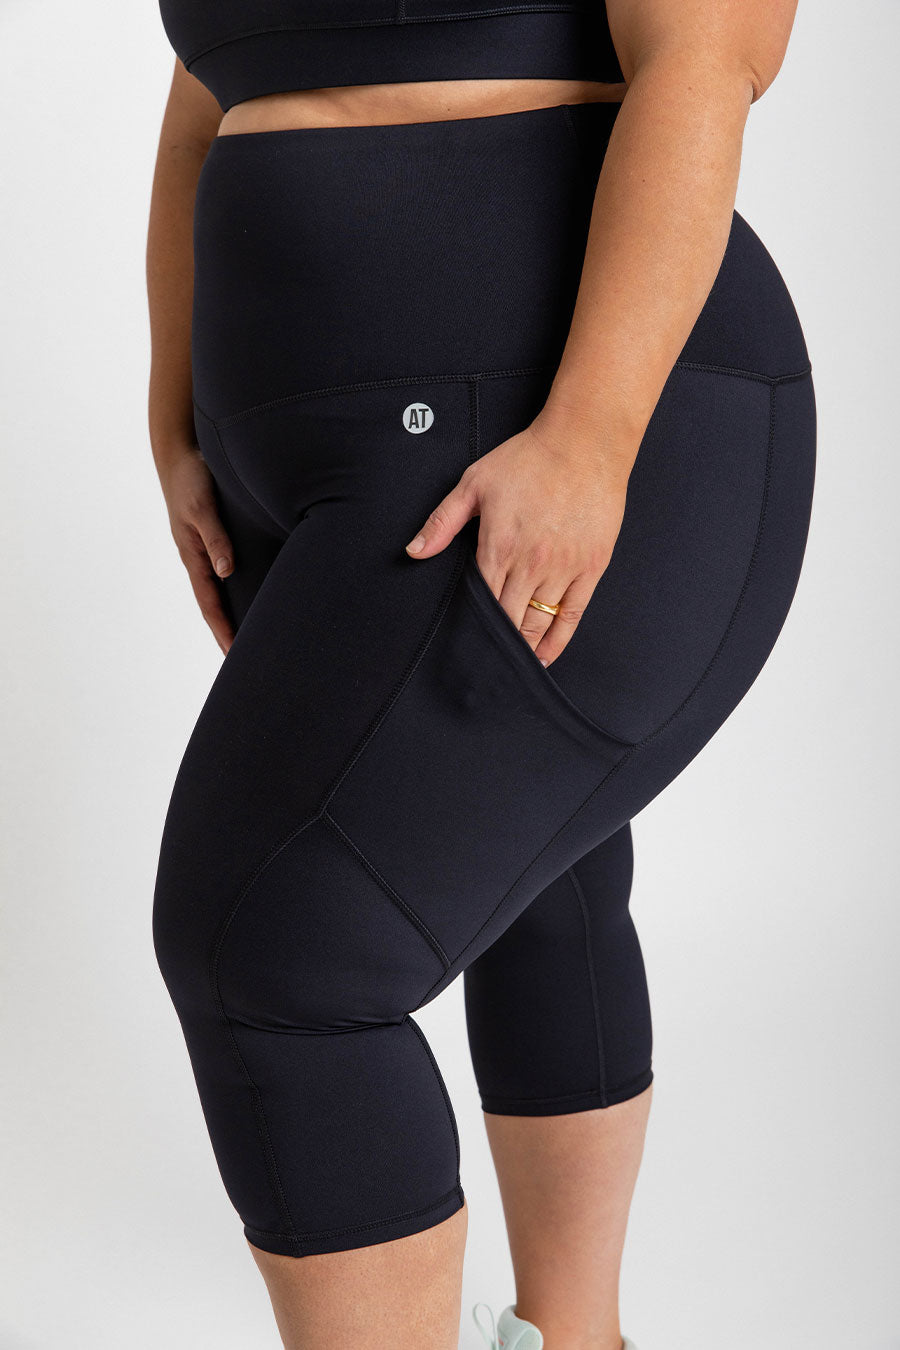 Smart Pocket 3/4 Length Tight - Black from Active Truth™
